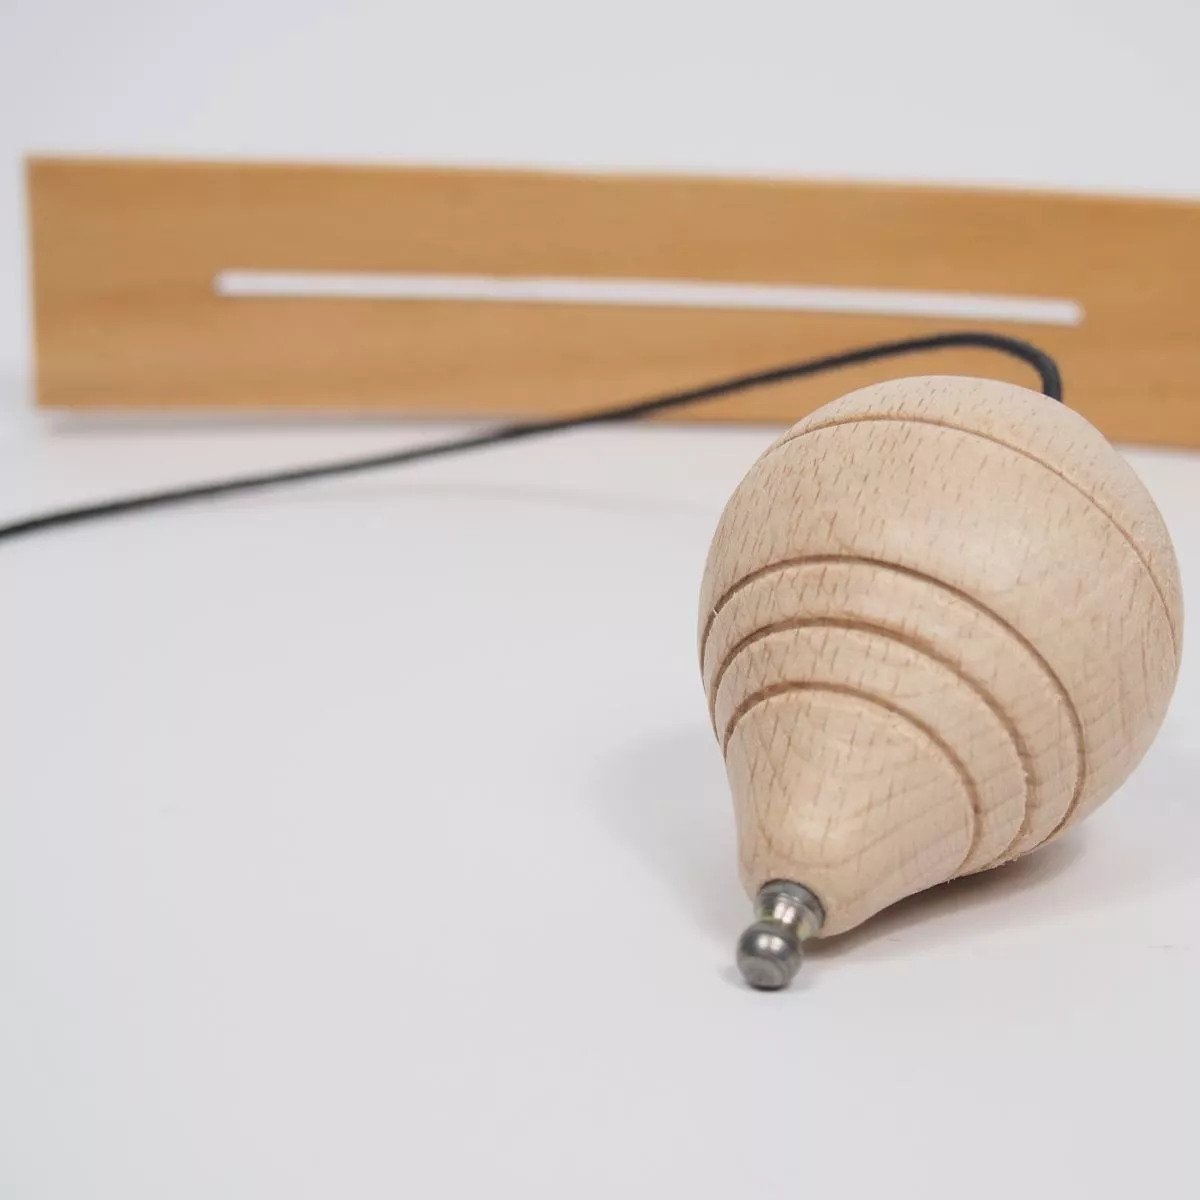 Decorative wooden balancing stand with pendulum